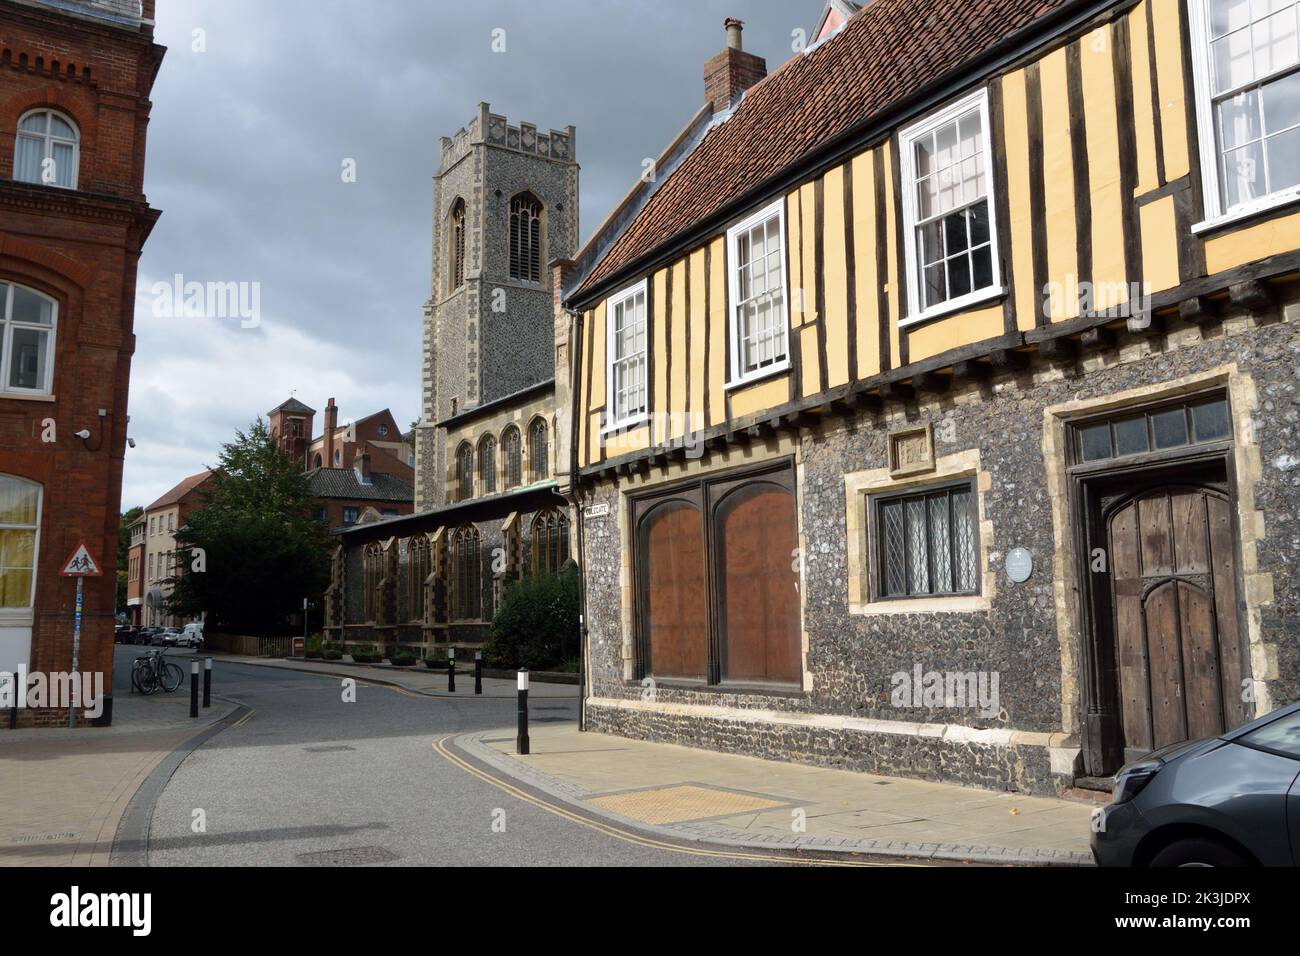 Colegate in Norwich, Norfolk, UK. In the foreground is Henry Bacon's House, with the church of St George Colegate in the background. Stock Photo